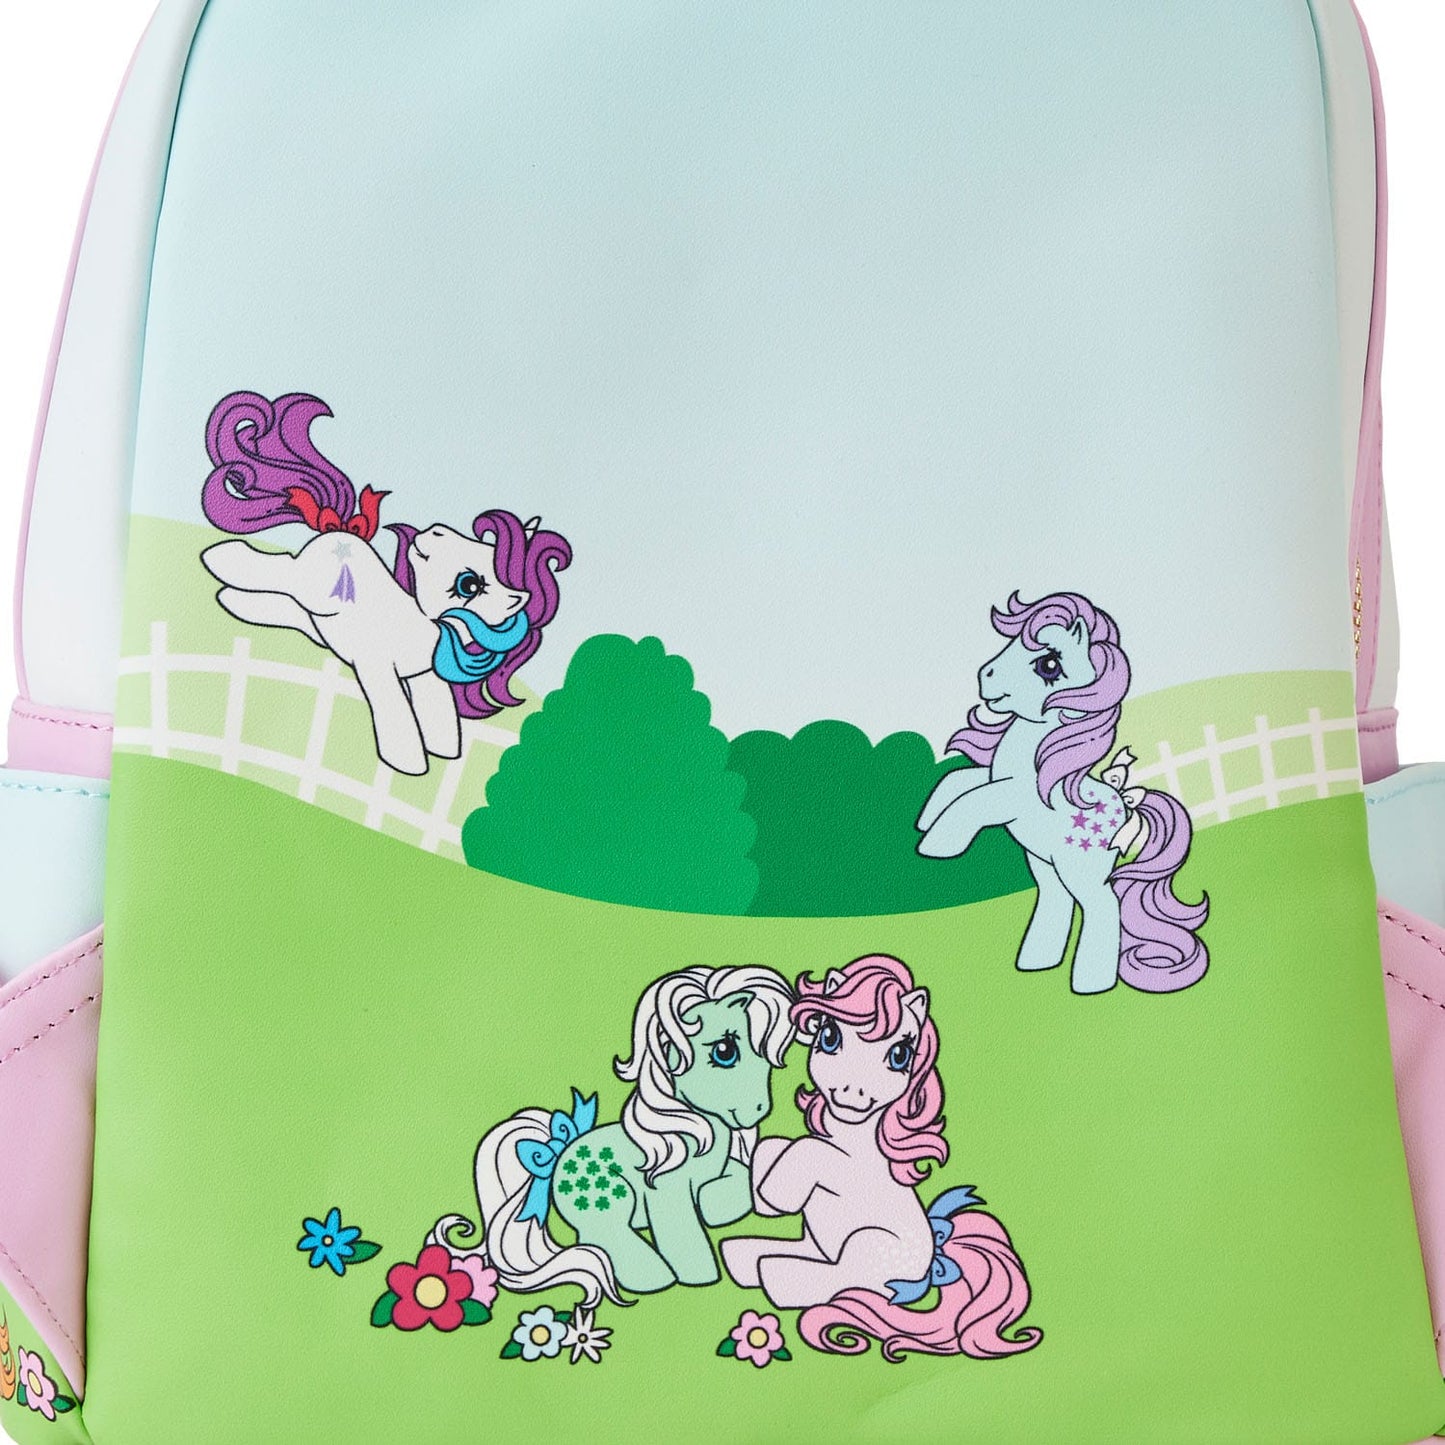 My Little Pony "Rucksack 40 Jahre Anniversary Retro Look" by Loungefly (2023)